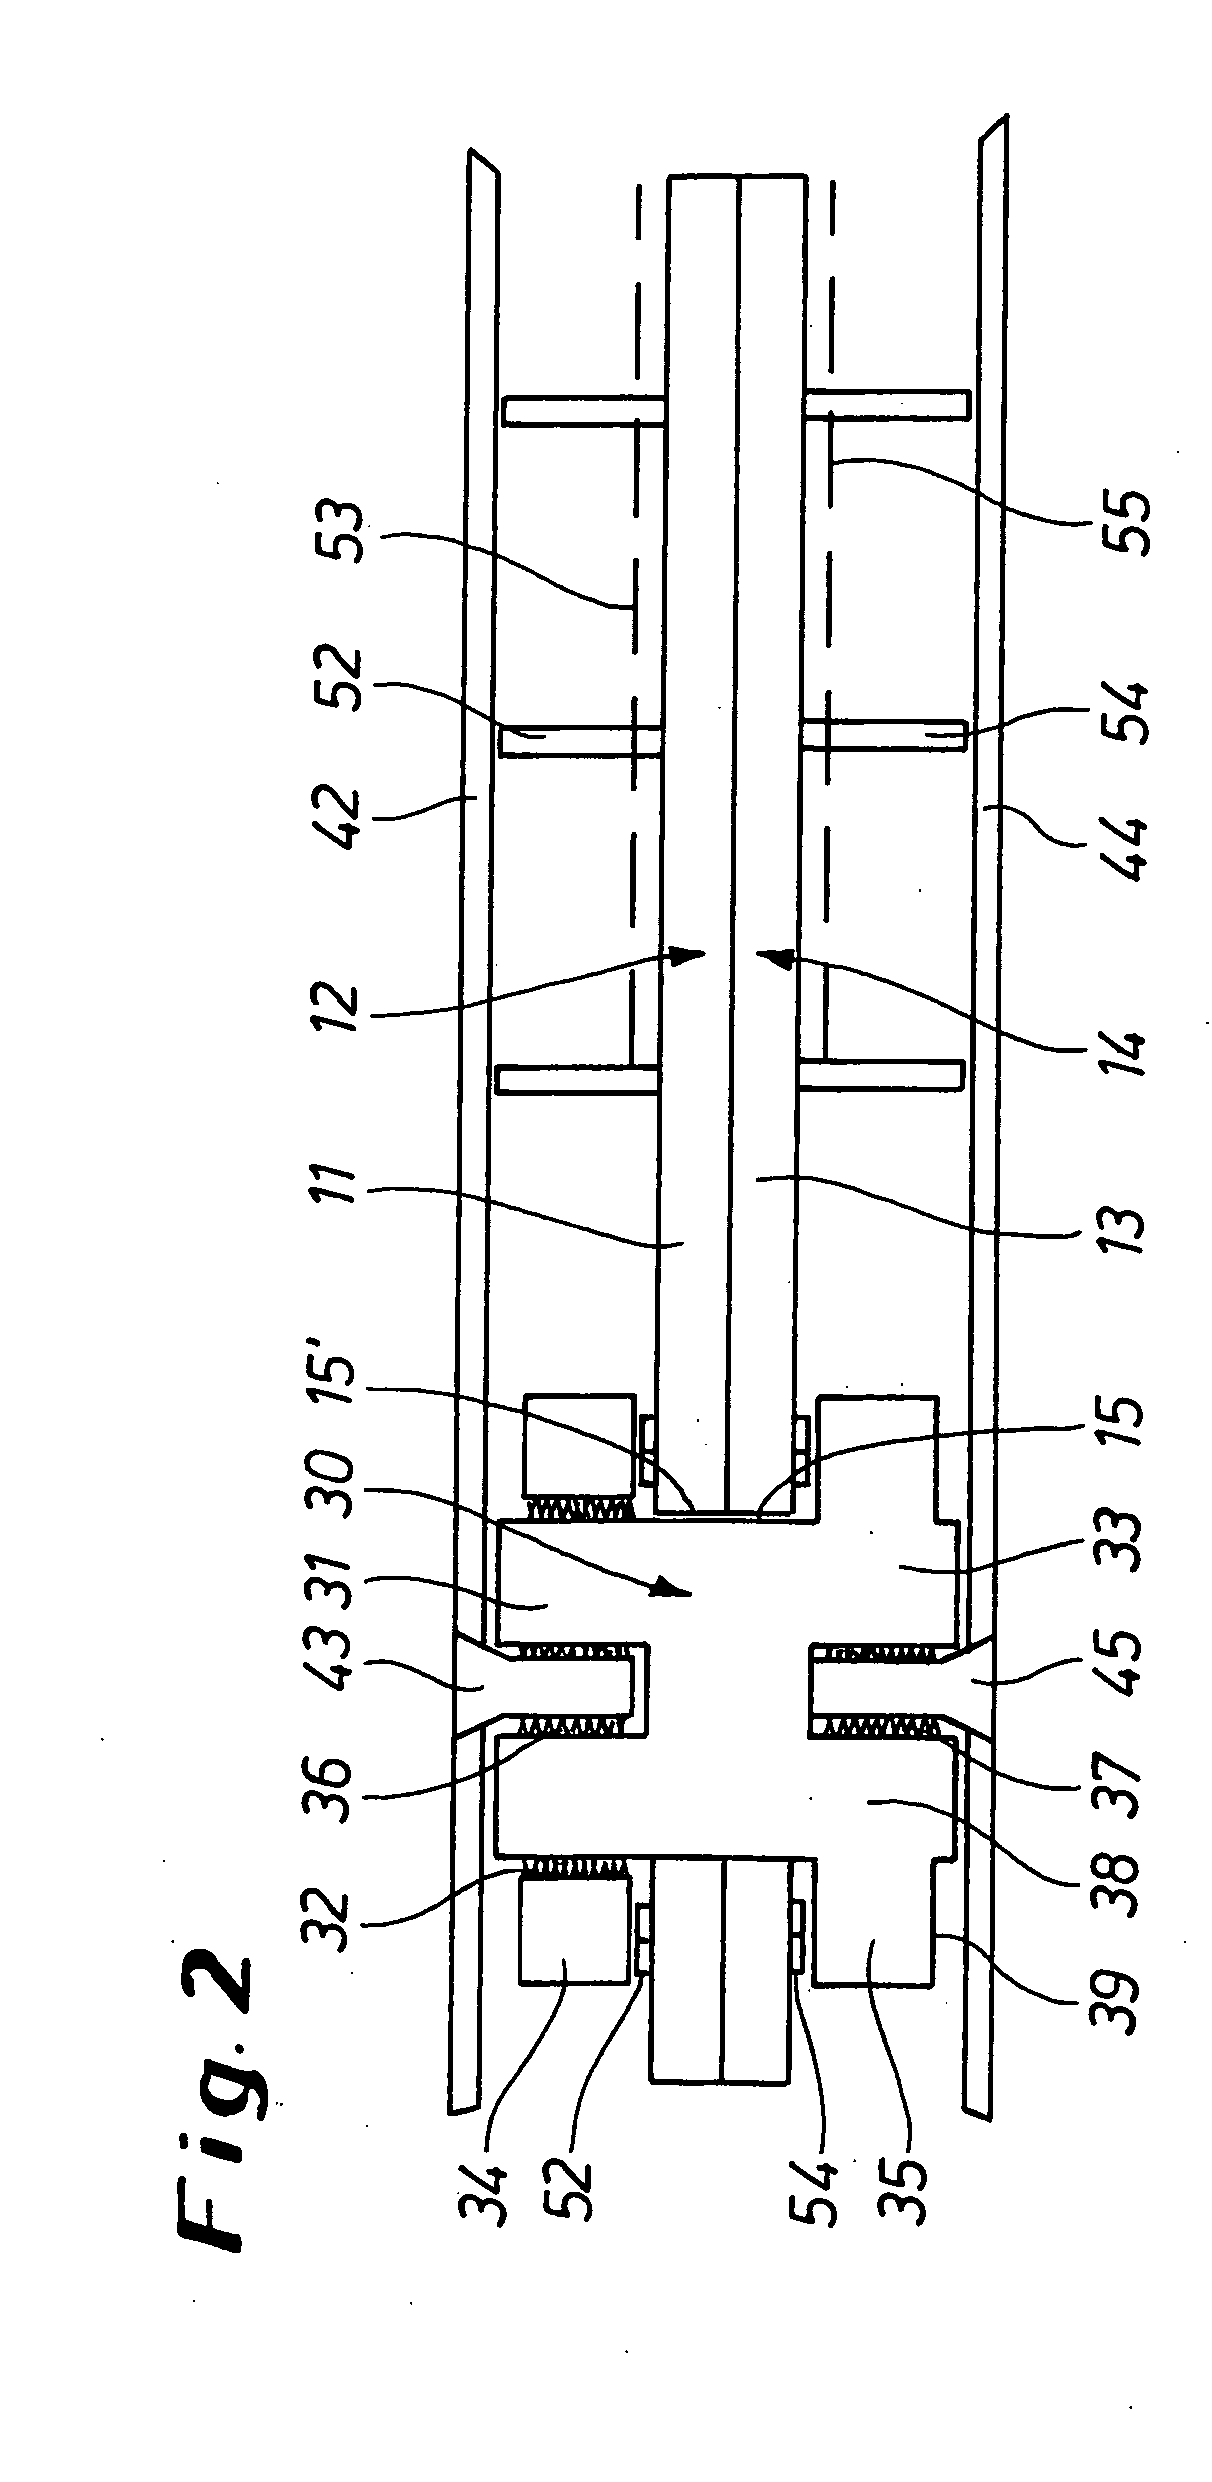 Structural unit for bipolar electrolysers